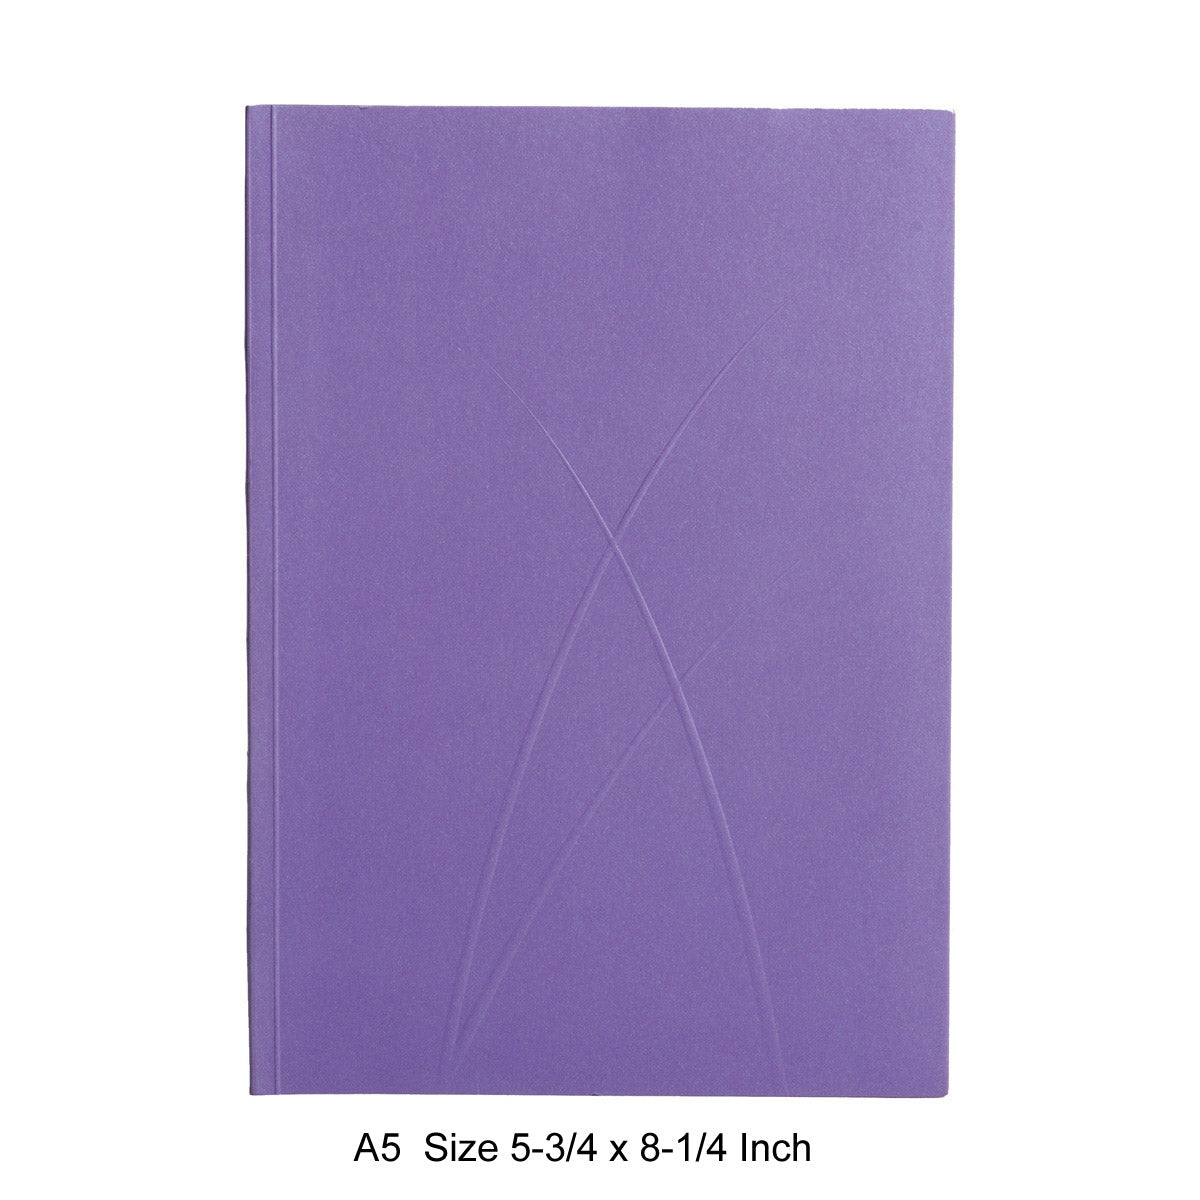 Paper-Oh Puro Notebook A5 Size